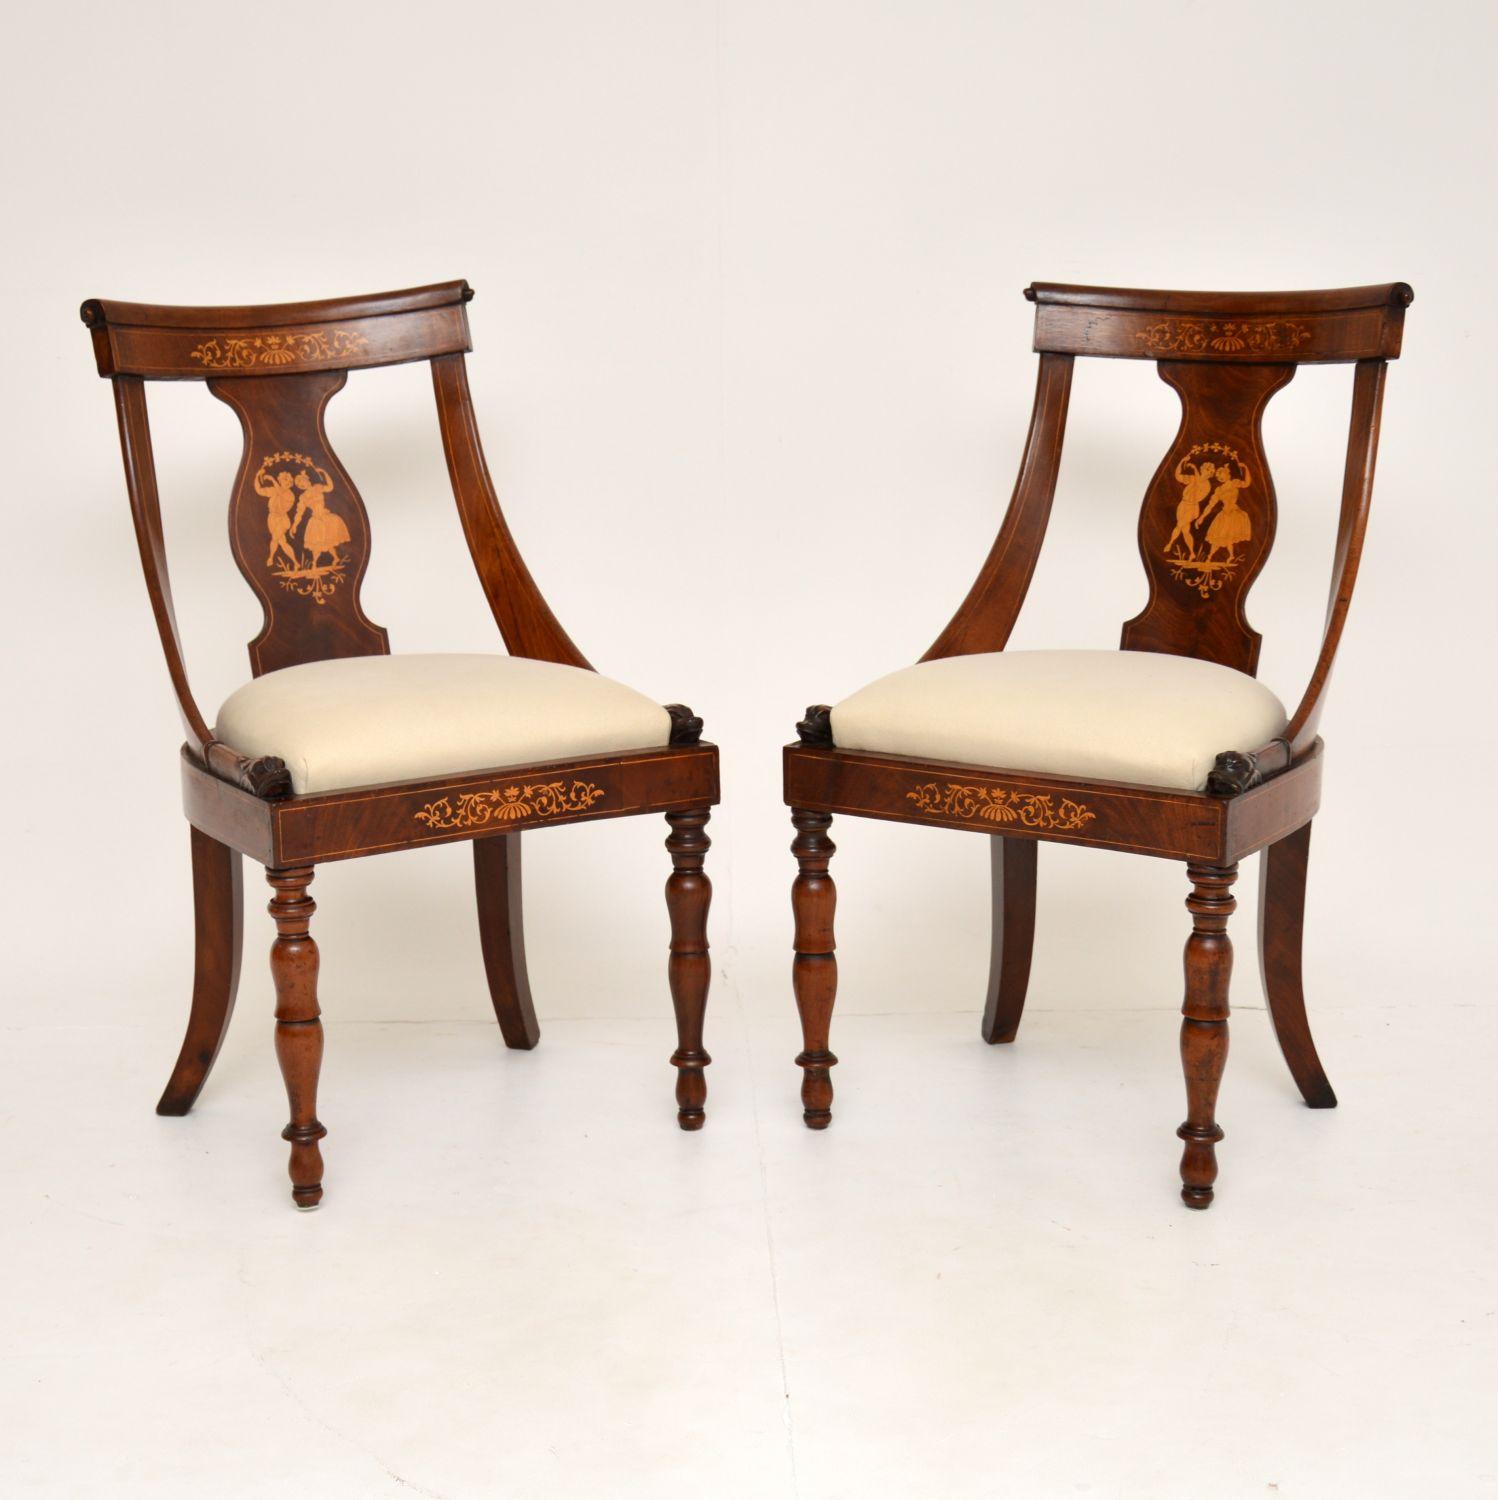 A superb and very rare pair of Dutch antique inlaid wood side chairs, dating from around the 1830-1840 period.

The quality is superb and these have a stunning neoclassical design. There are profuse satin wood inlays, and they sit on beautifully